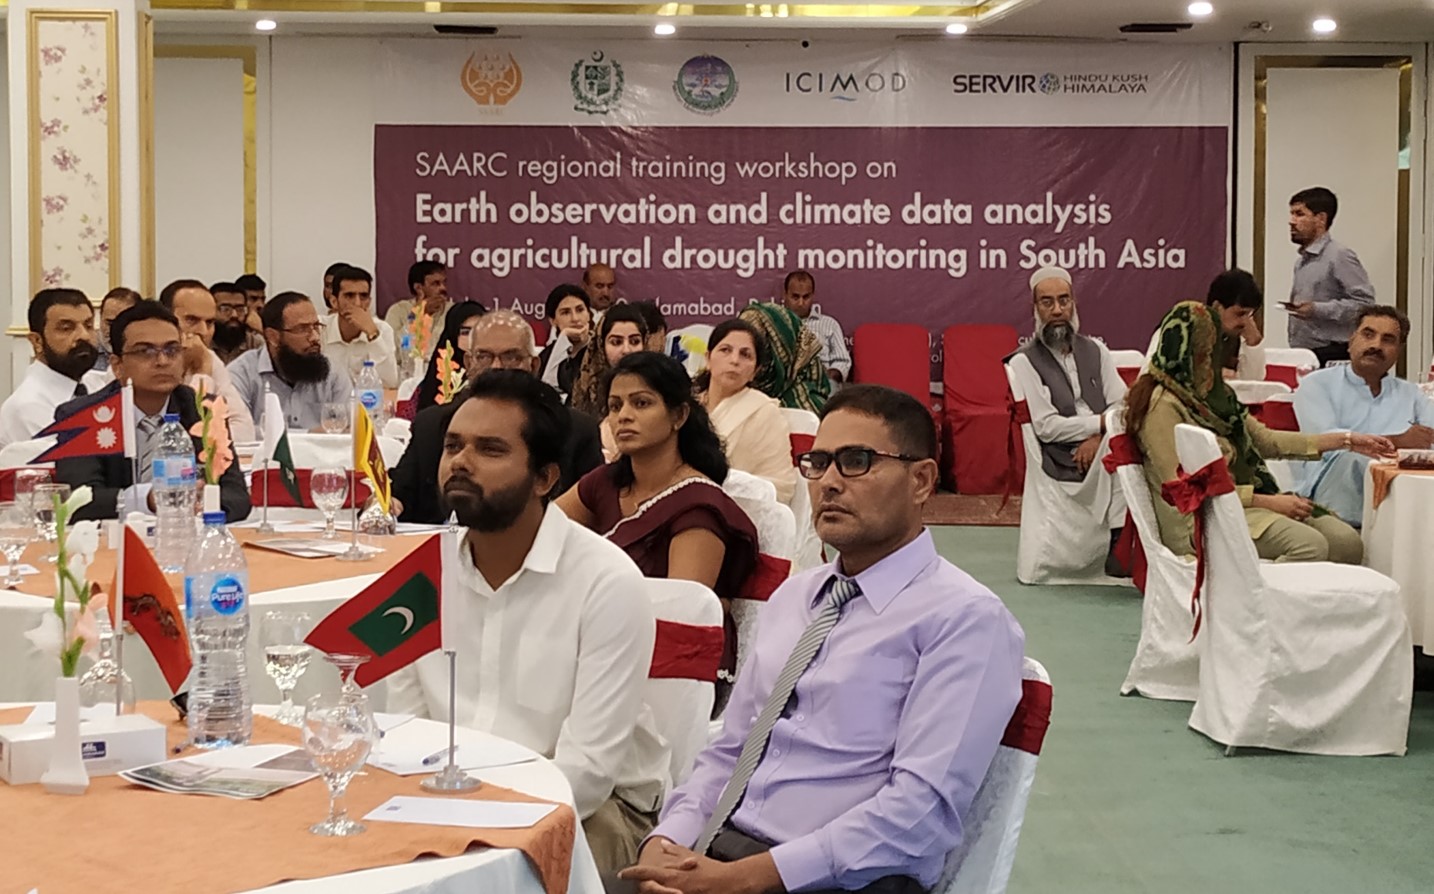 Participants at the regional workshop on earth observation and climate data analysis for agriculture drought monitoring in South Asia. (Photo: ICIMOD)